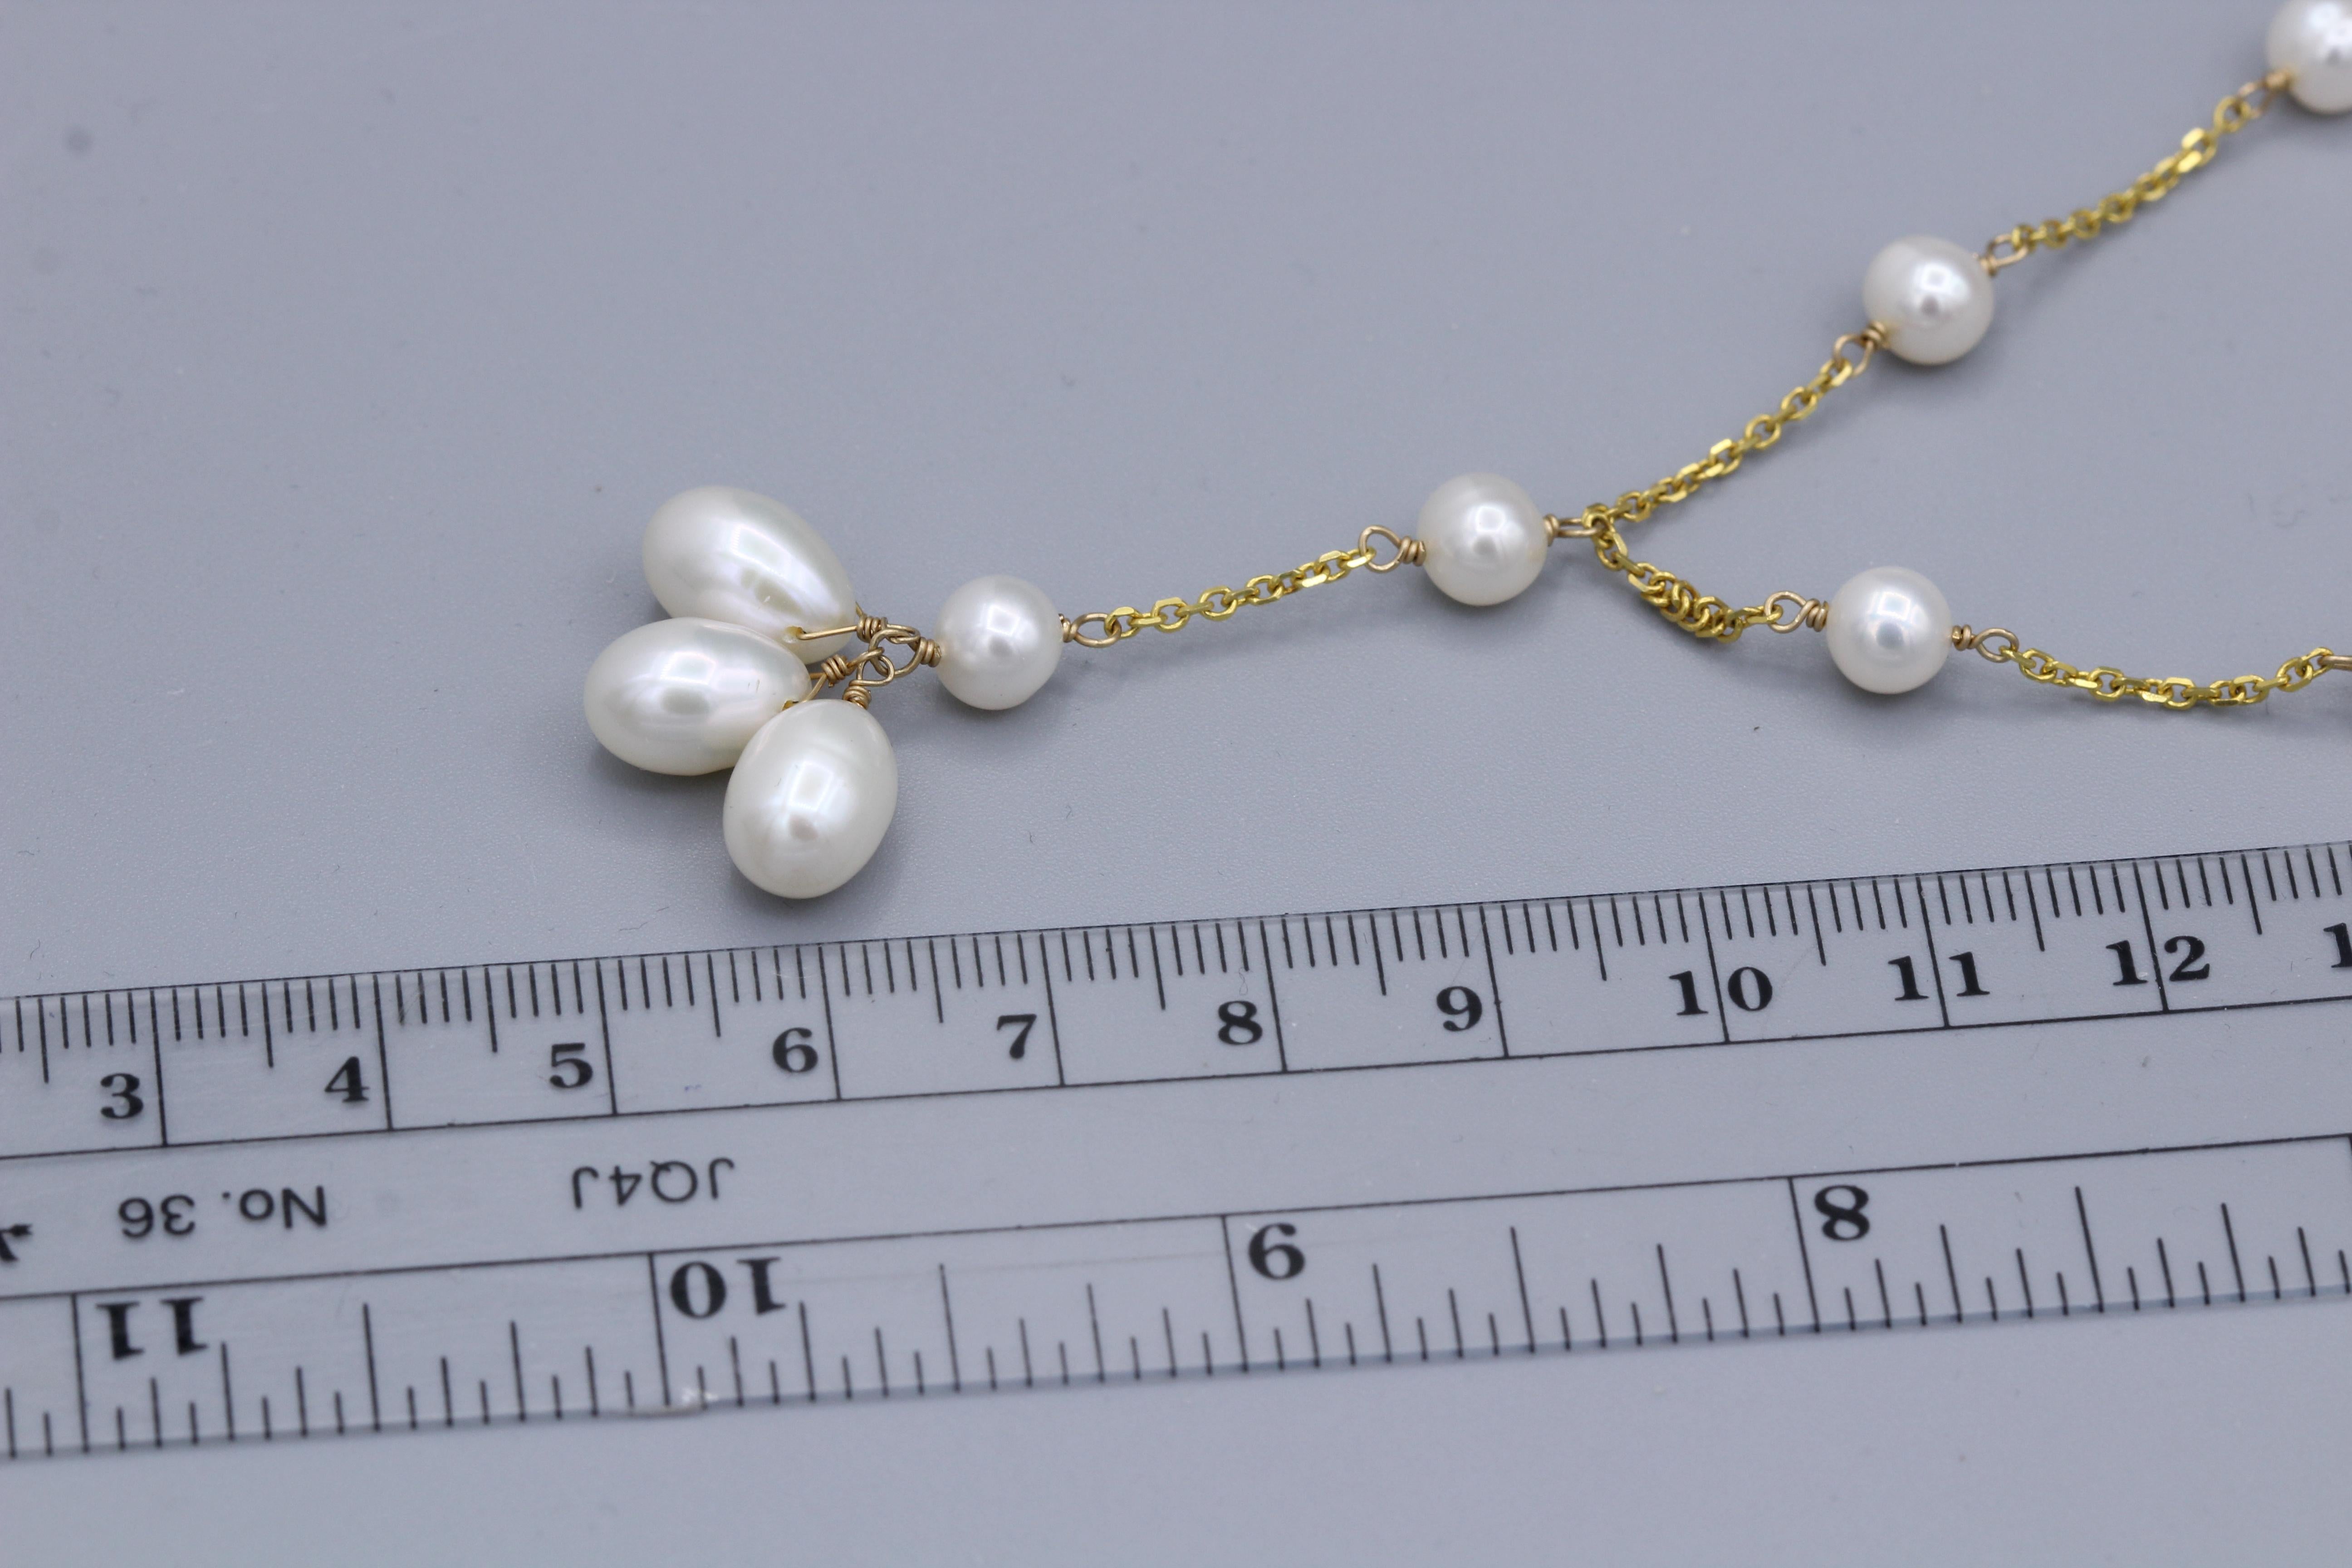 Beaded Pearl Necklace Dangling Wire Style 
14k Yellow Gold
Length 16.5’ Inch
Dangle Length approx. 1.5’ Inch
Fresh water pearls 5.0 mm and oval 7x10 mm
Spring ring lock
Total weight  9.4 grams

